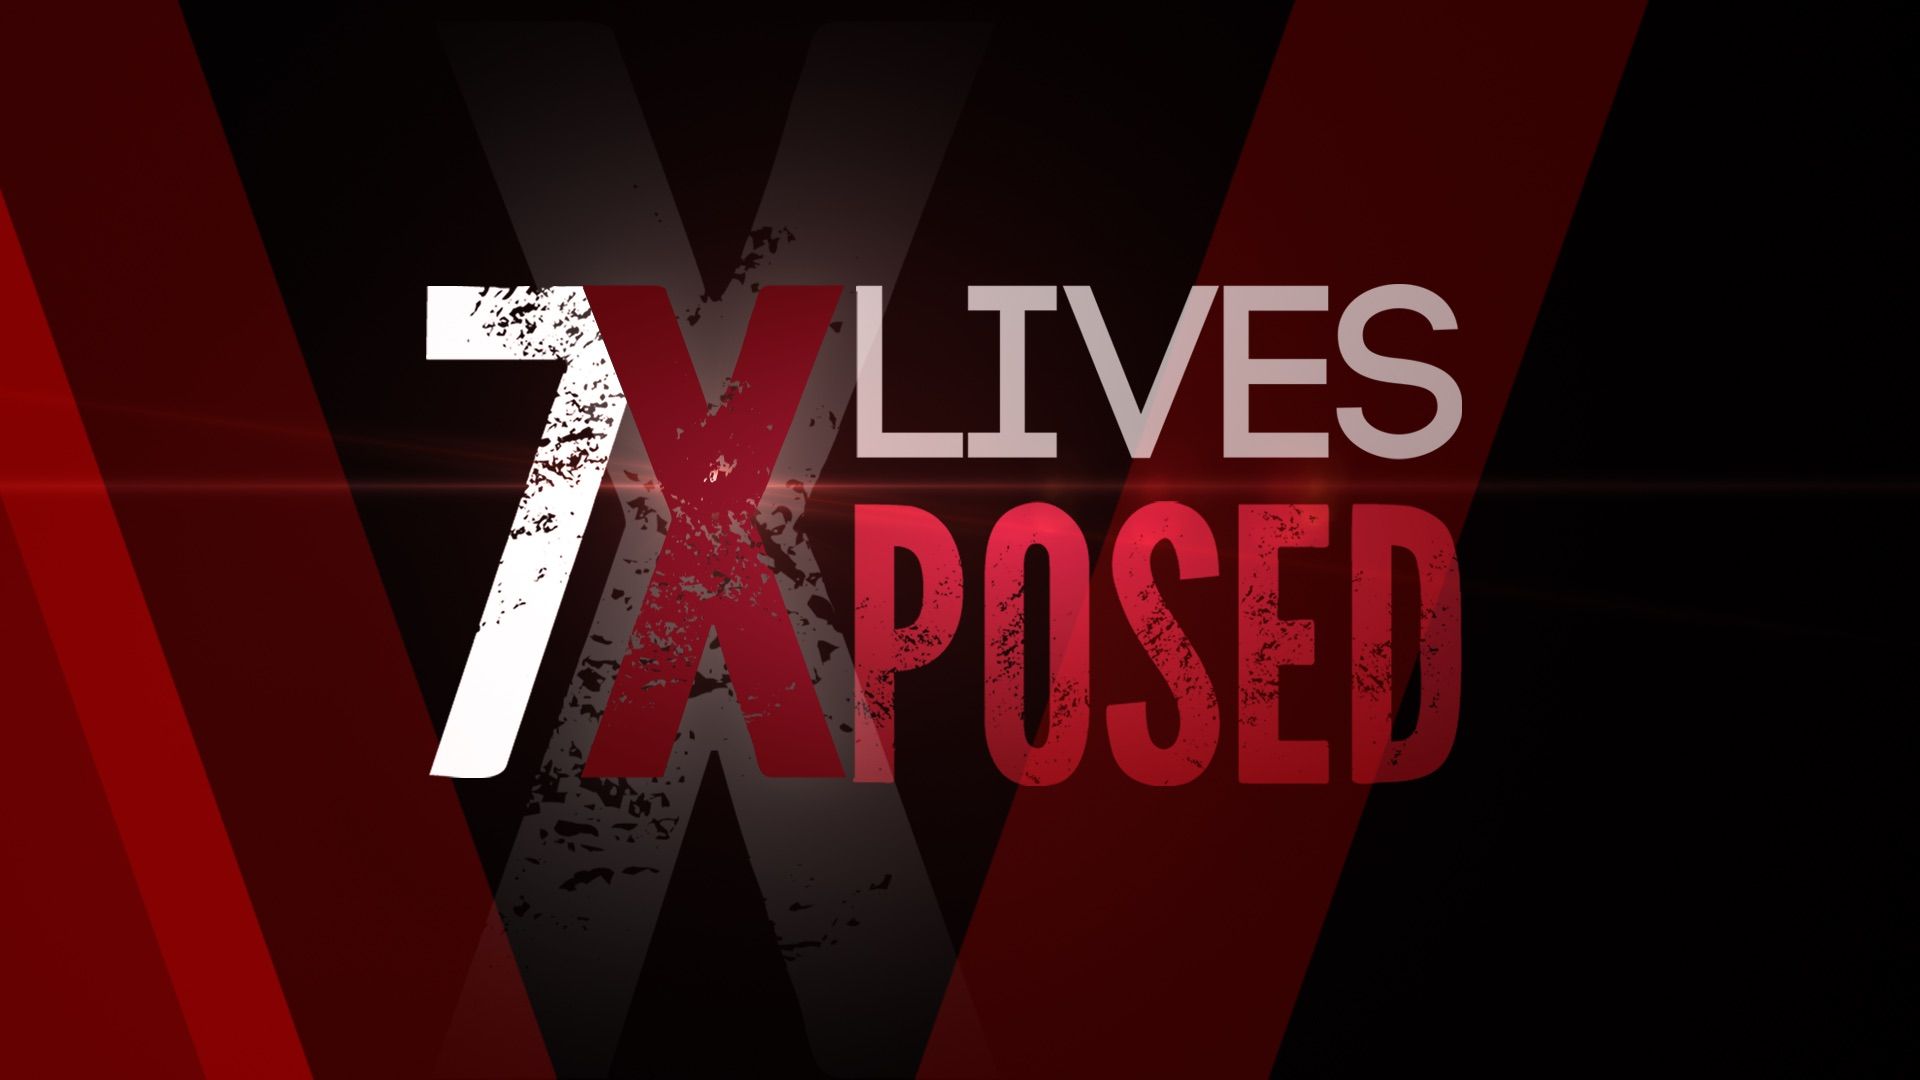 alicia clynten recommends 7 lives exposed pic